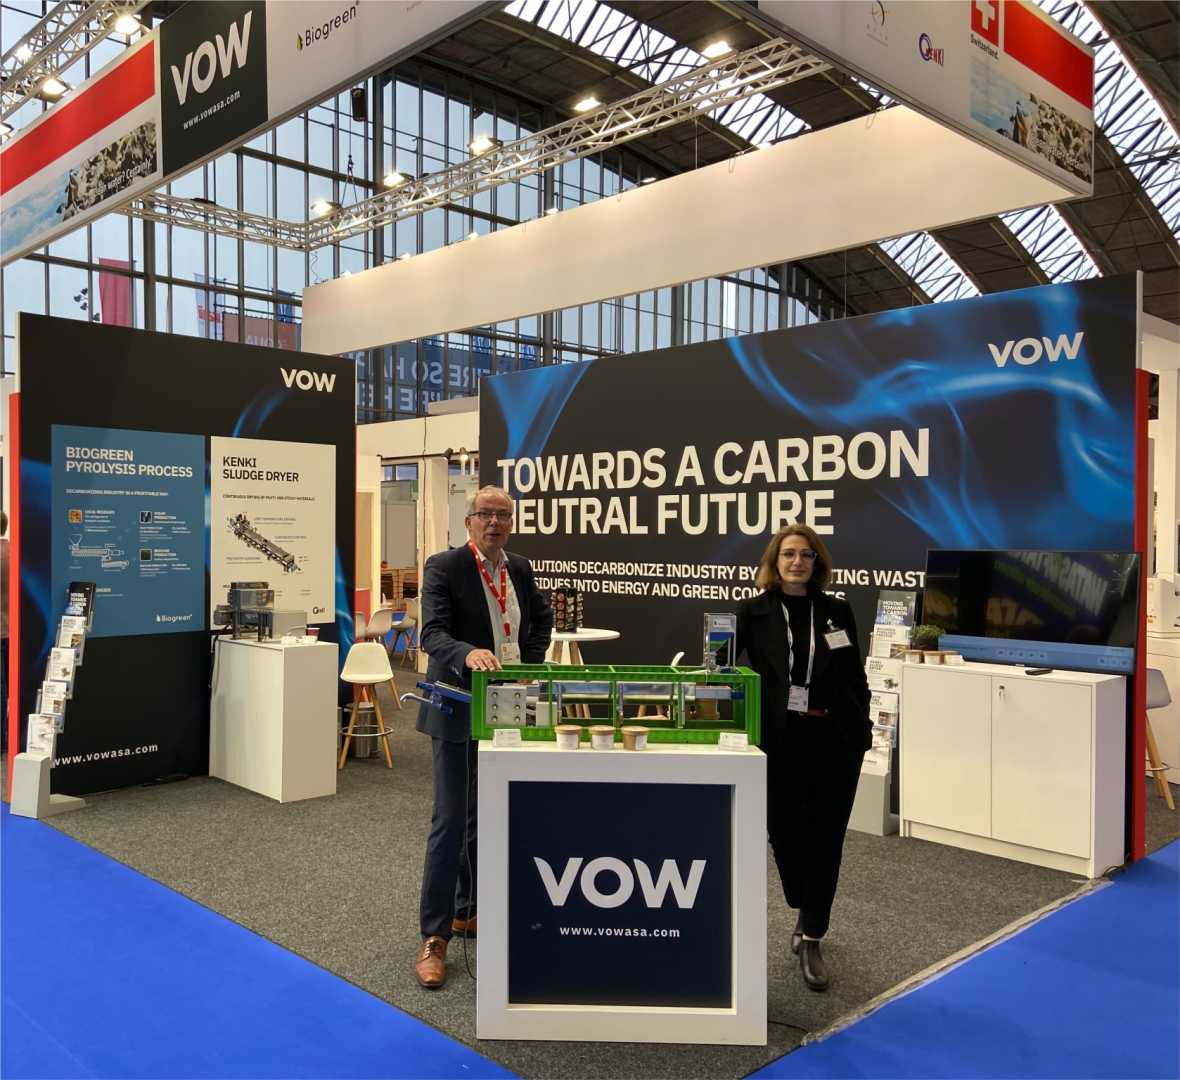 VOW ASA: This week you can meet our team at Aquatech Amsterdam